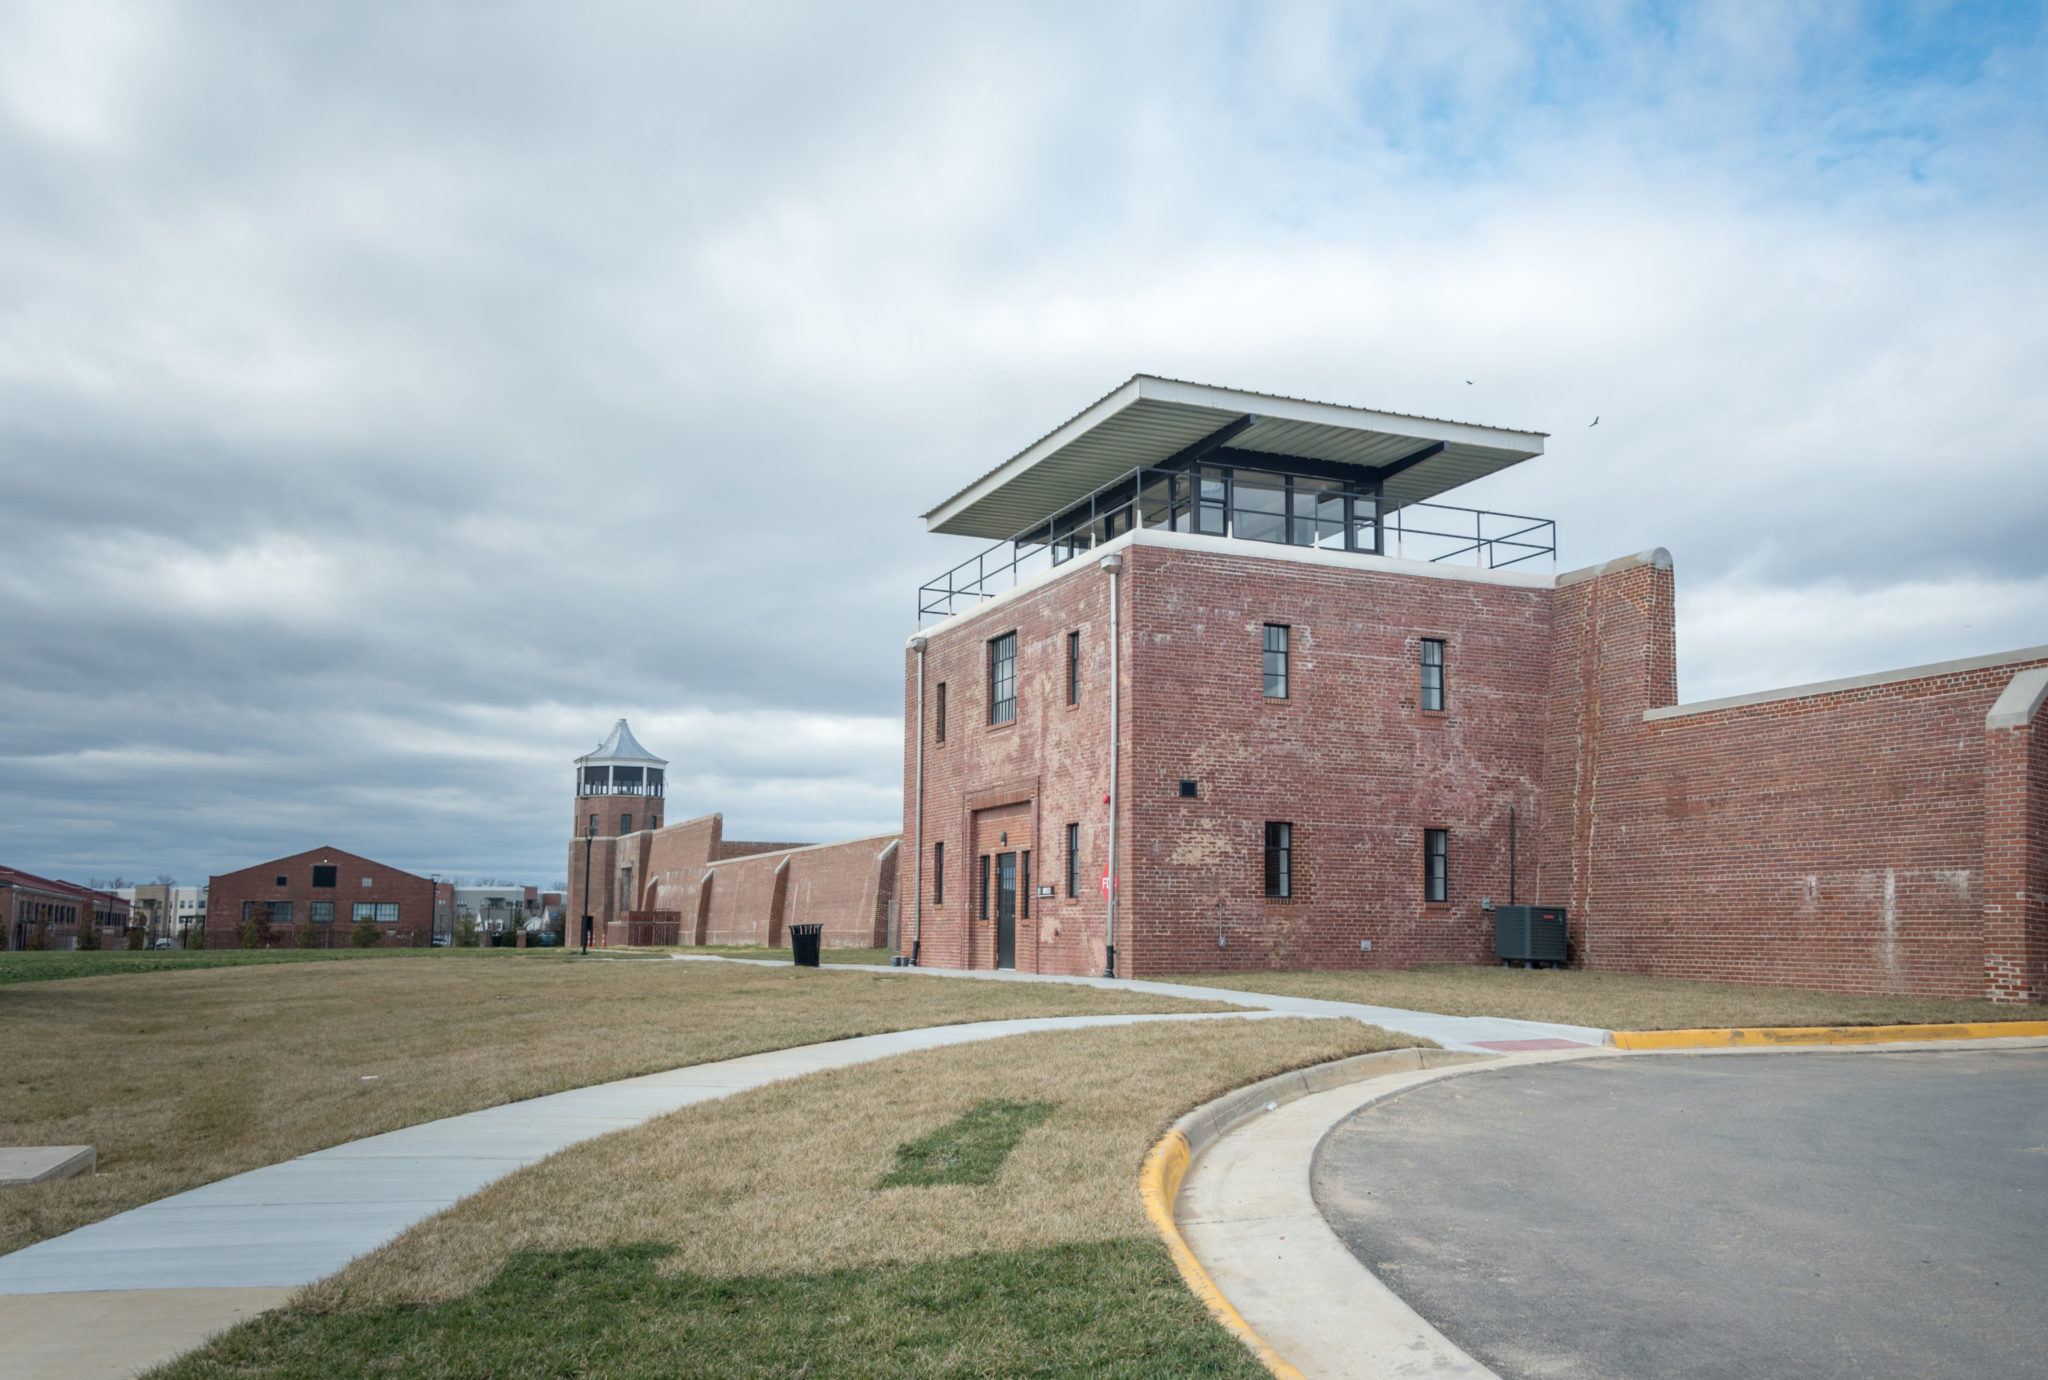 A Notorious DC Prison Is Now a Classy Suburban Development. Here’s What ...